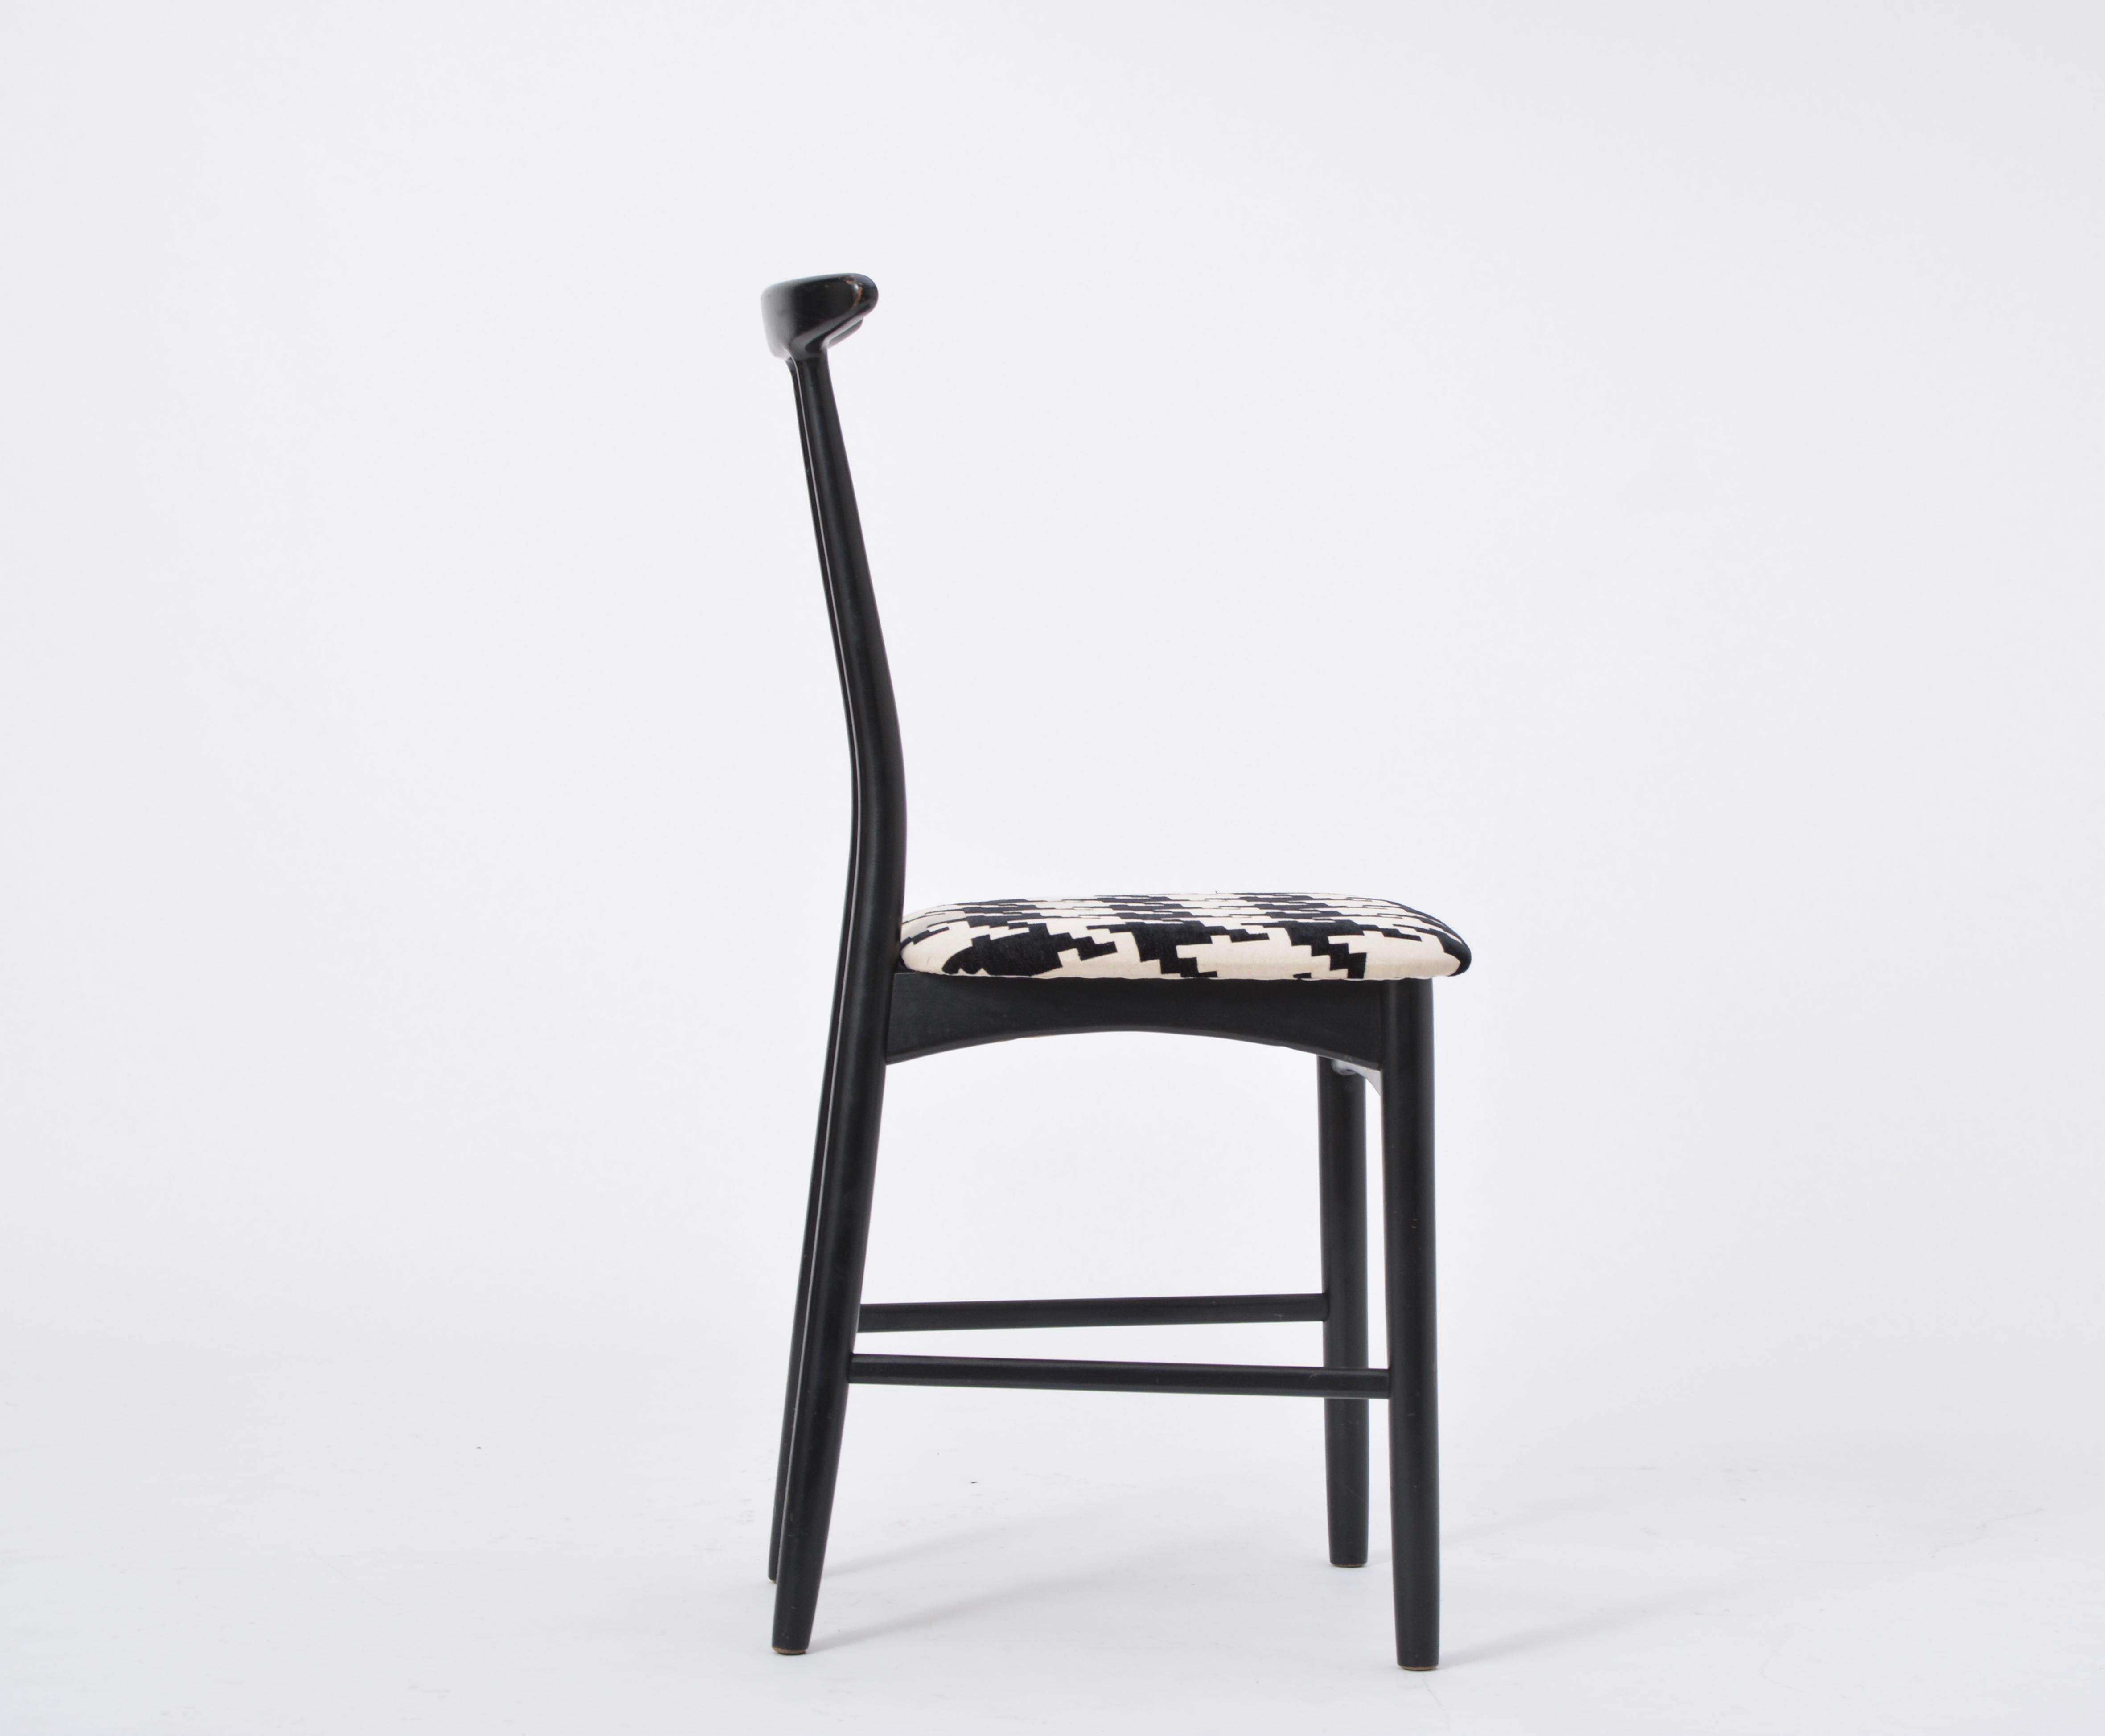 Lacquered Swedish Mid-Century Modern chair by Gemla Diö